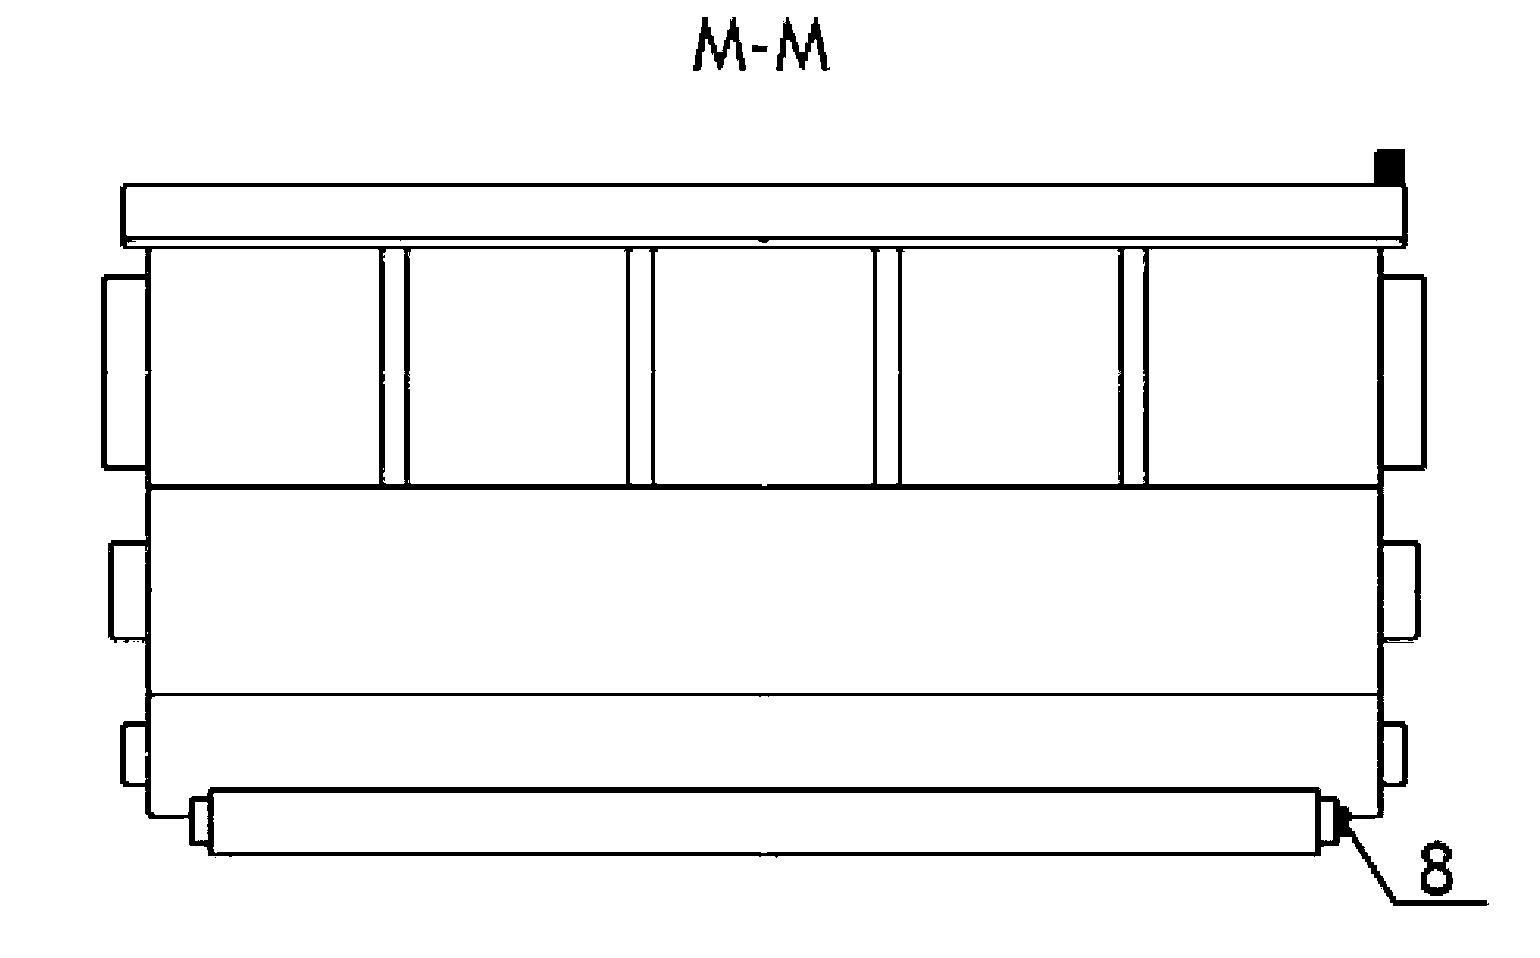 Twenty-high roll mill chatter mark monitoring system and method based on angular domain